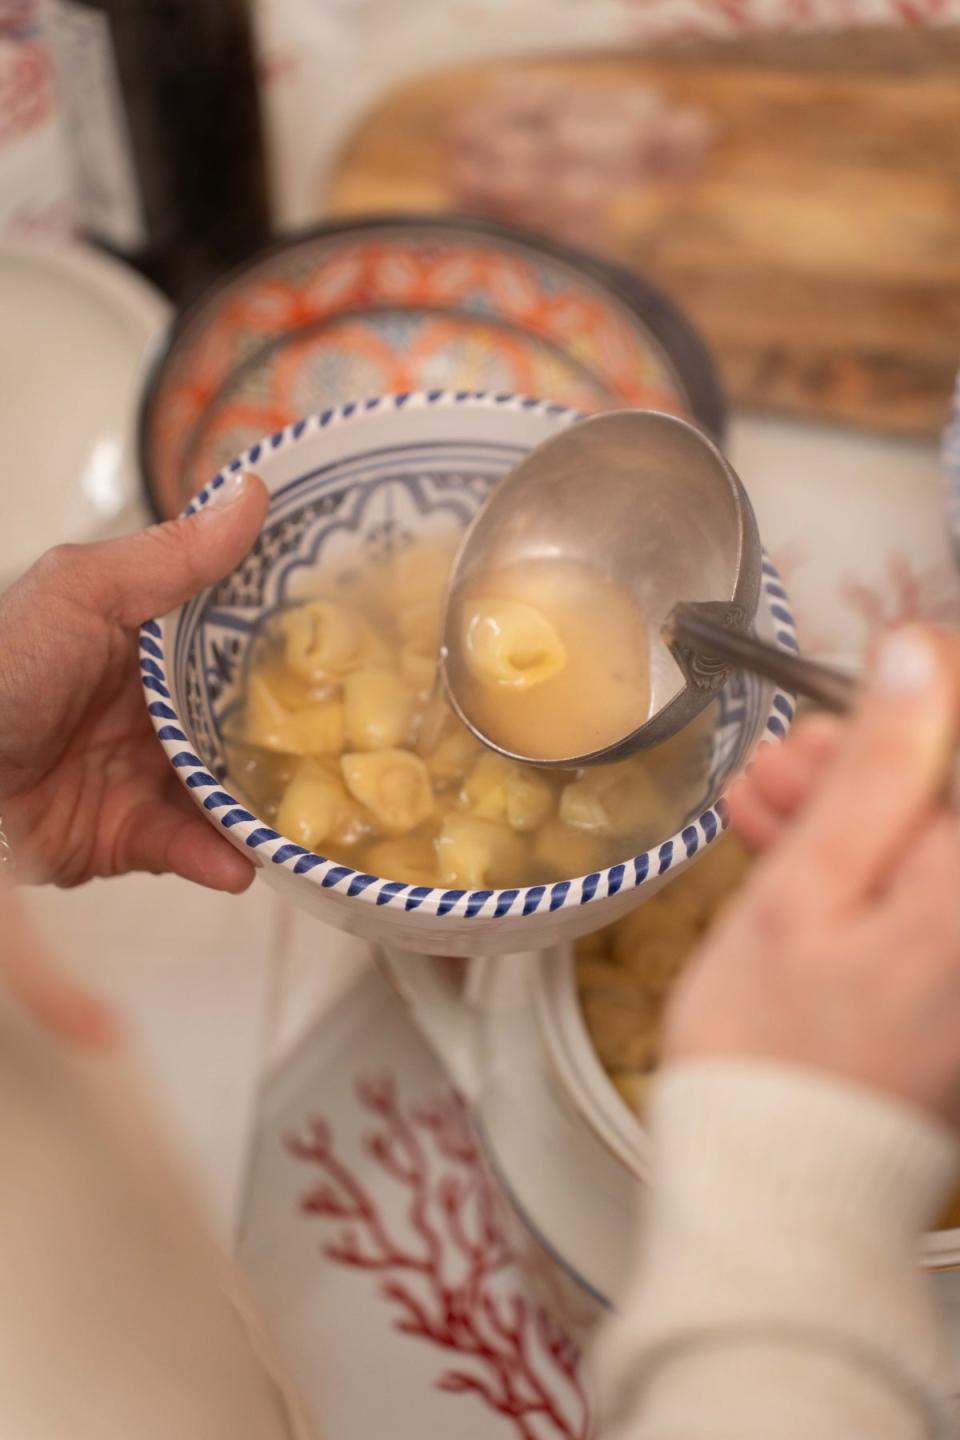 Tortellini in brodo, made during our cookery class with Oriana (Peroni)